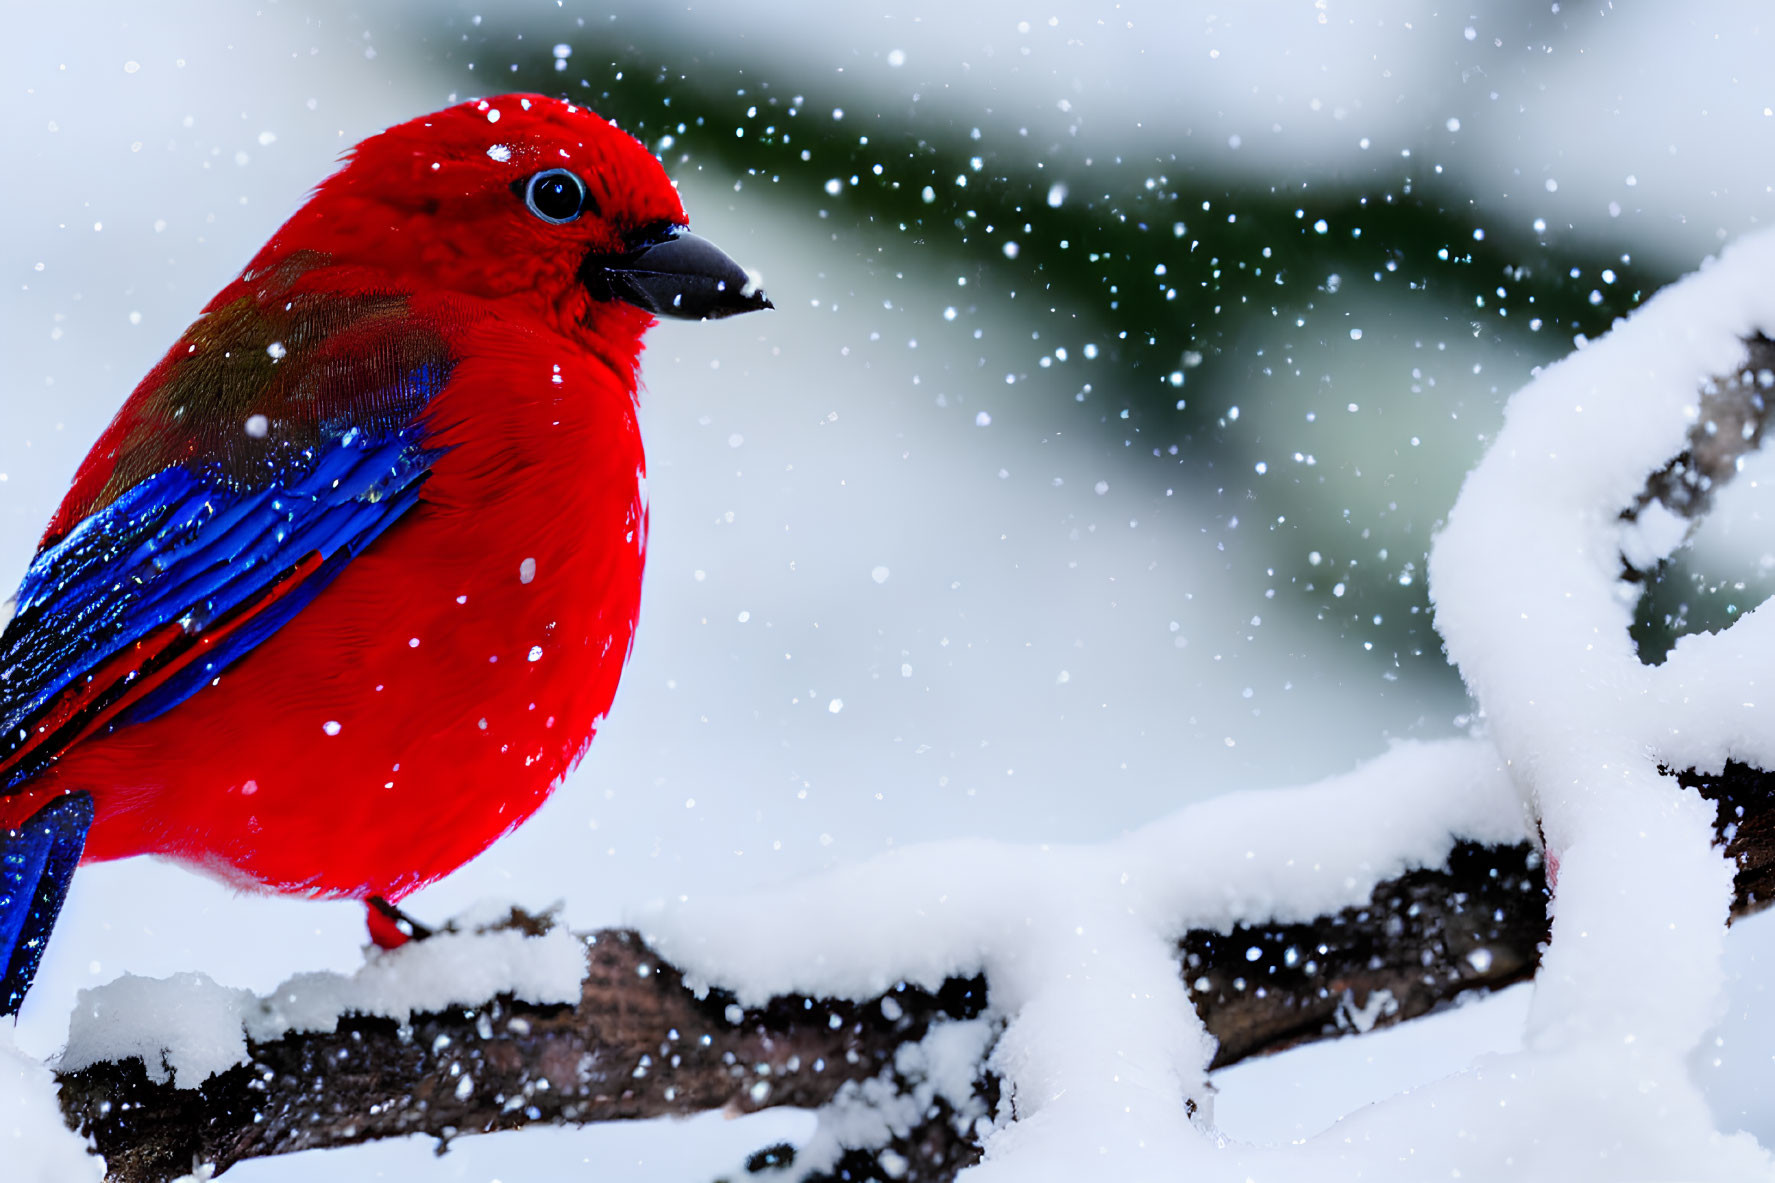 Colorful bird on snow-covered branch with falling snowflakes